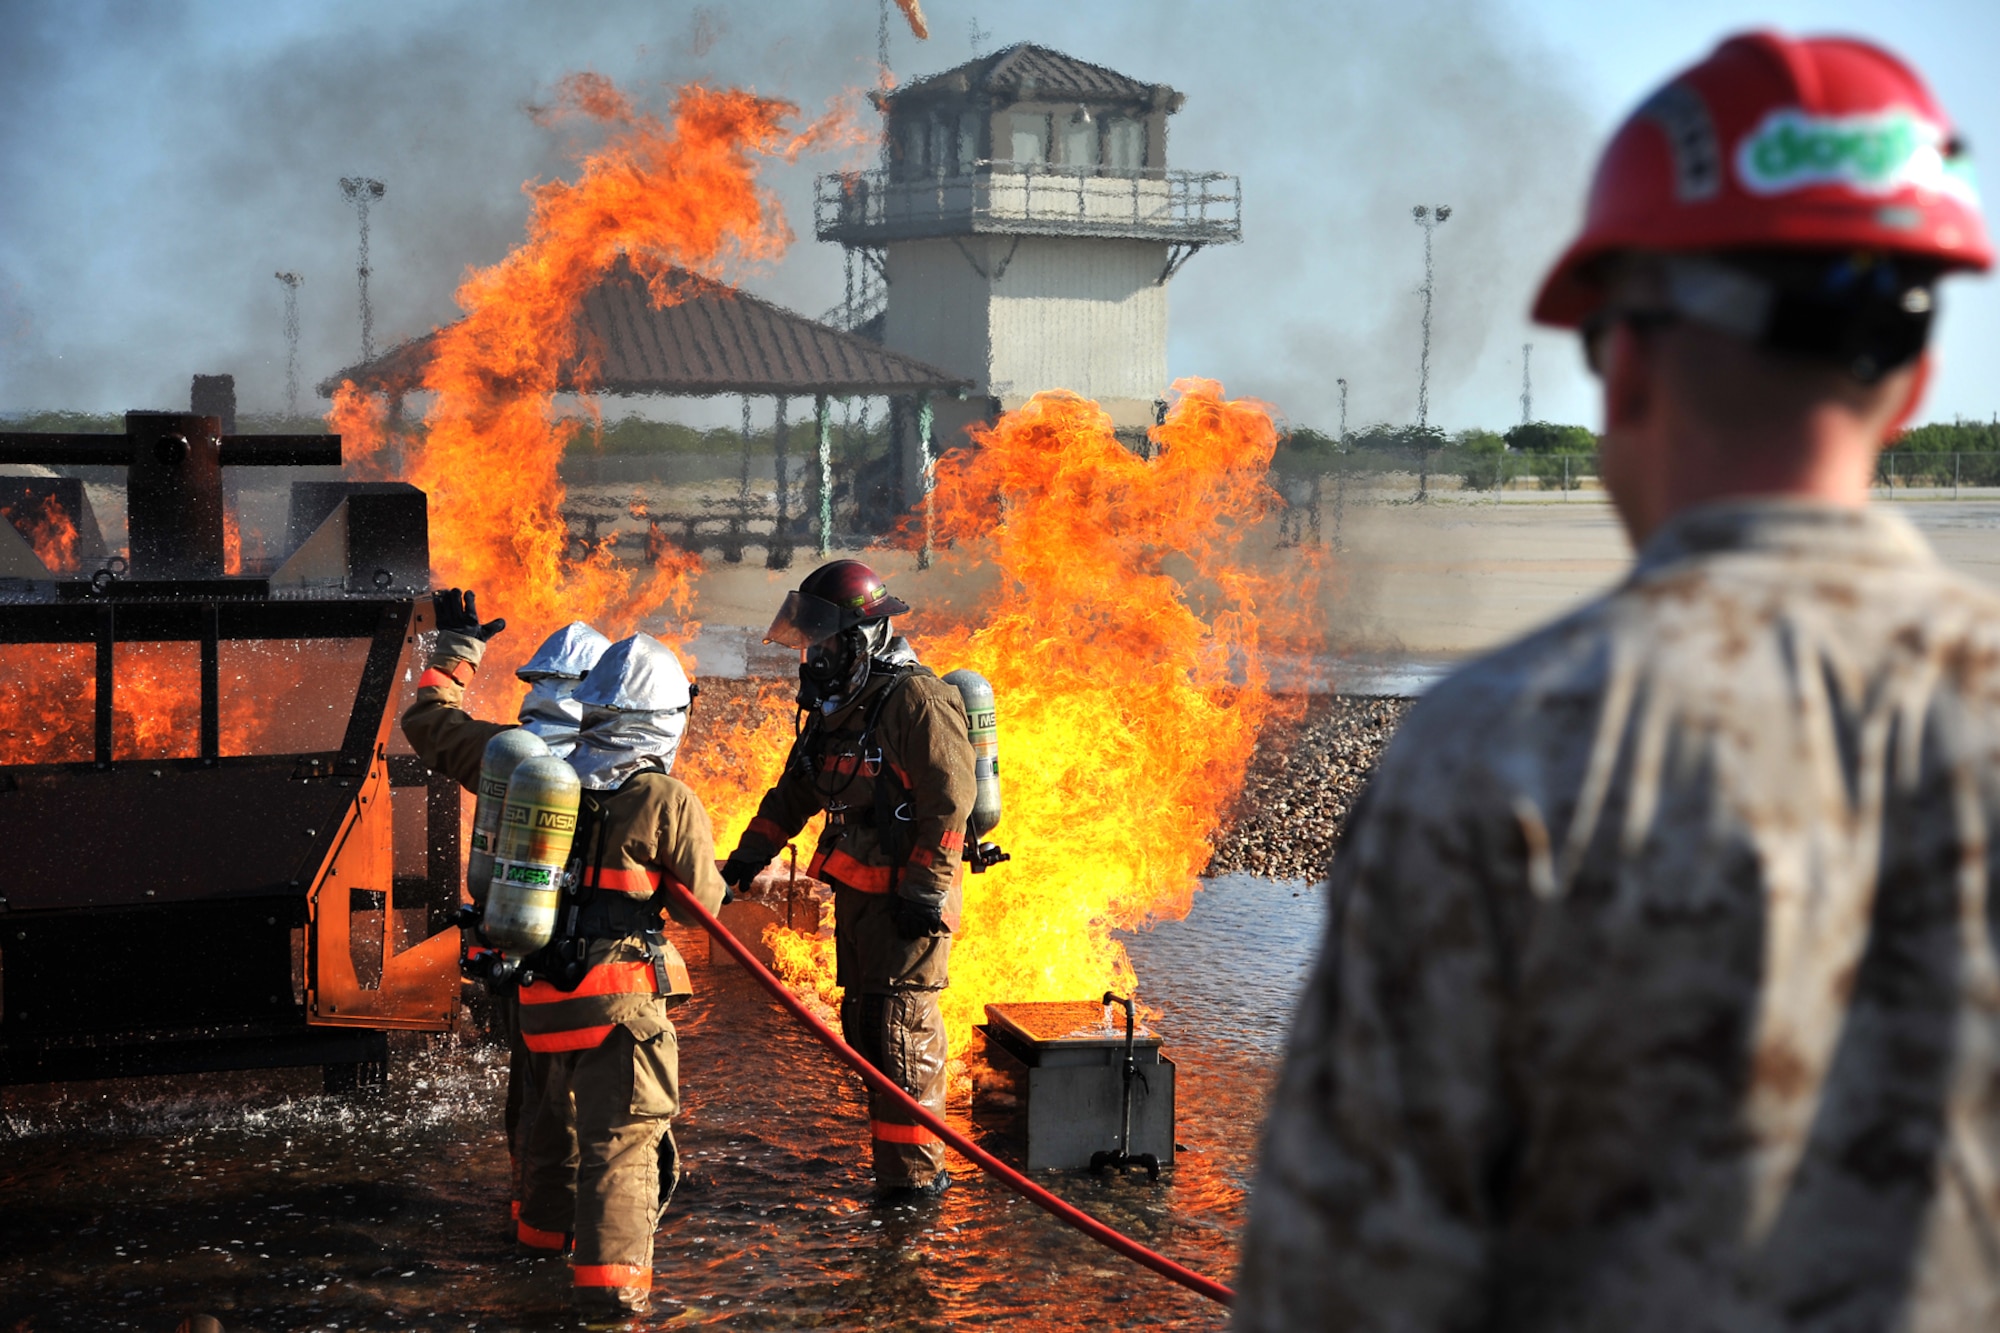 GOODFELLOW AIR FORCE BASE, Texas - An instructor from the 312th Training Squadron supervises as students put out a fire in the Helo Trainer at the Louis F. Garland Department of Defense Fire Academy Sept. 6. Students use the trainer in the sixth training block to help prepare them to face small aircraft fires in a real-life situation. (U.S. Air Force/ Senior Airman Michael Smith)